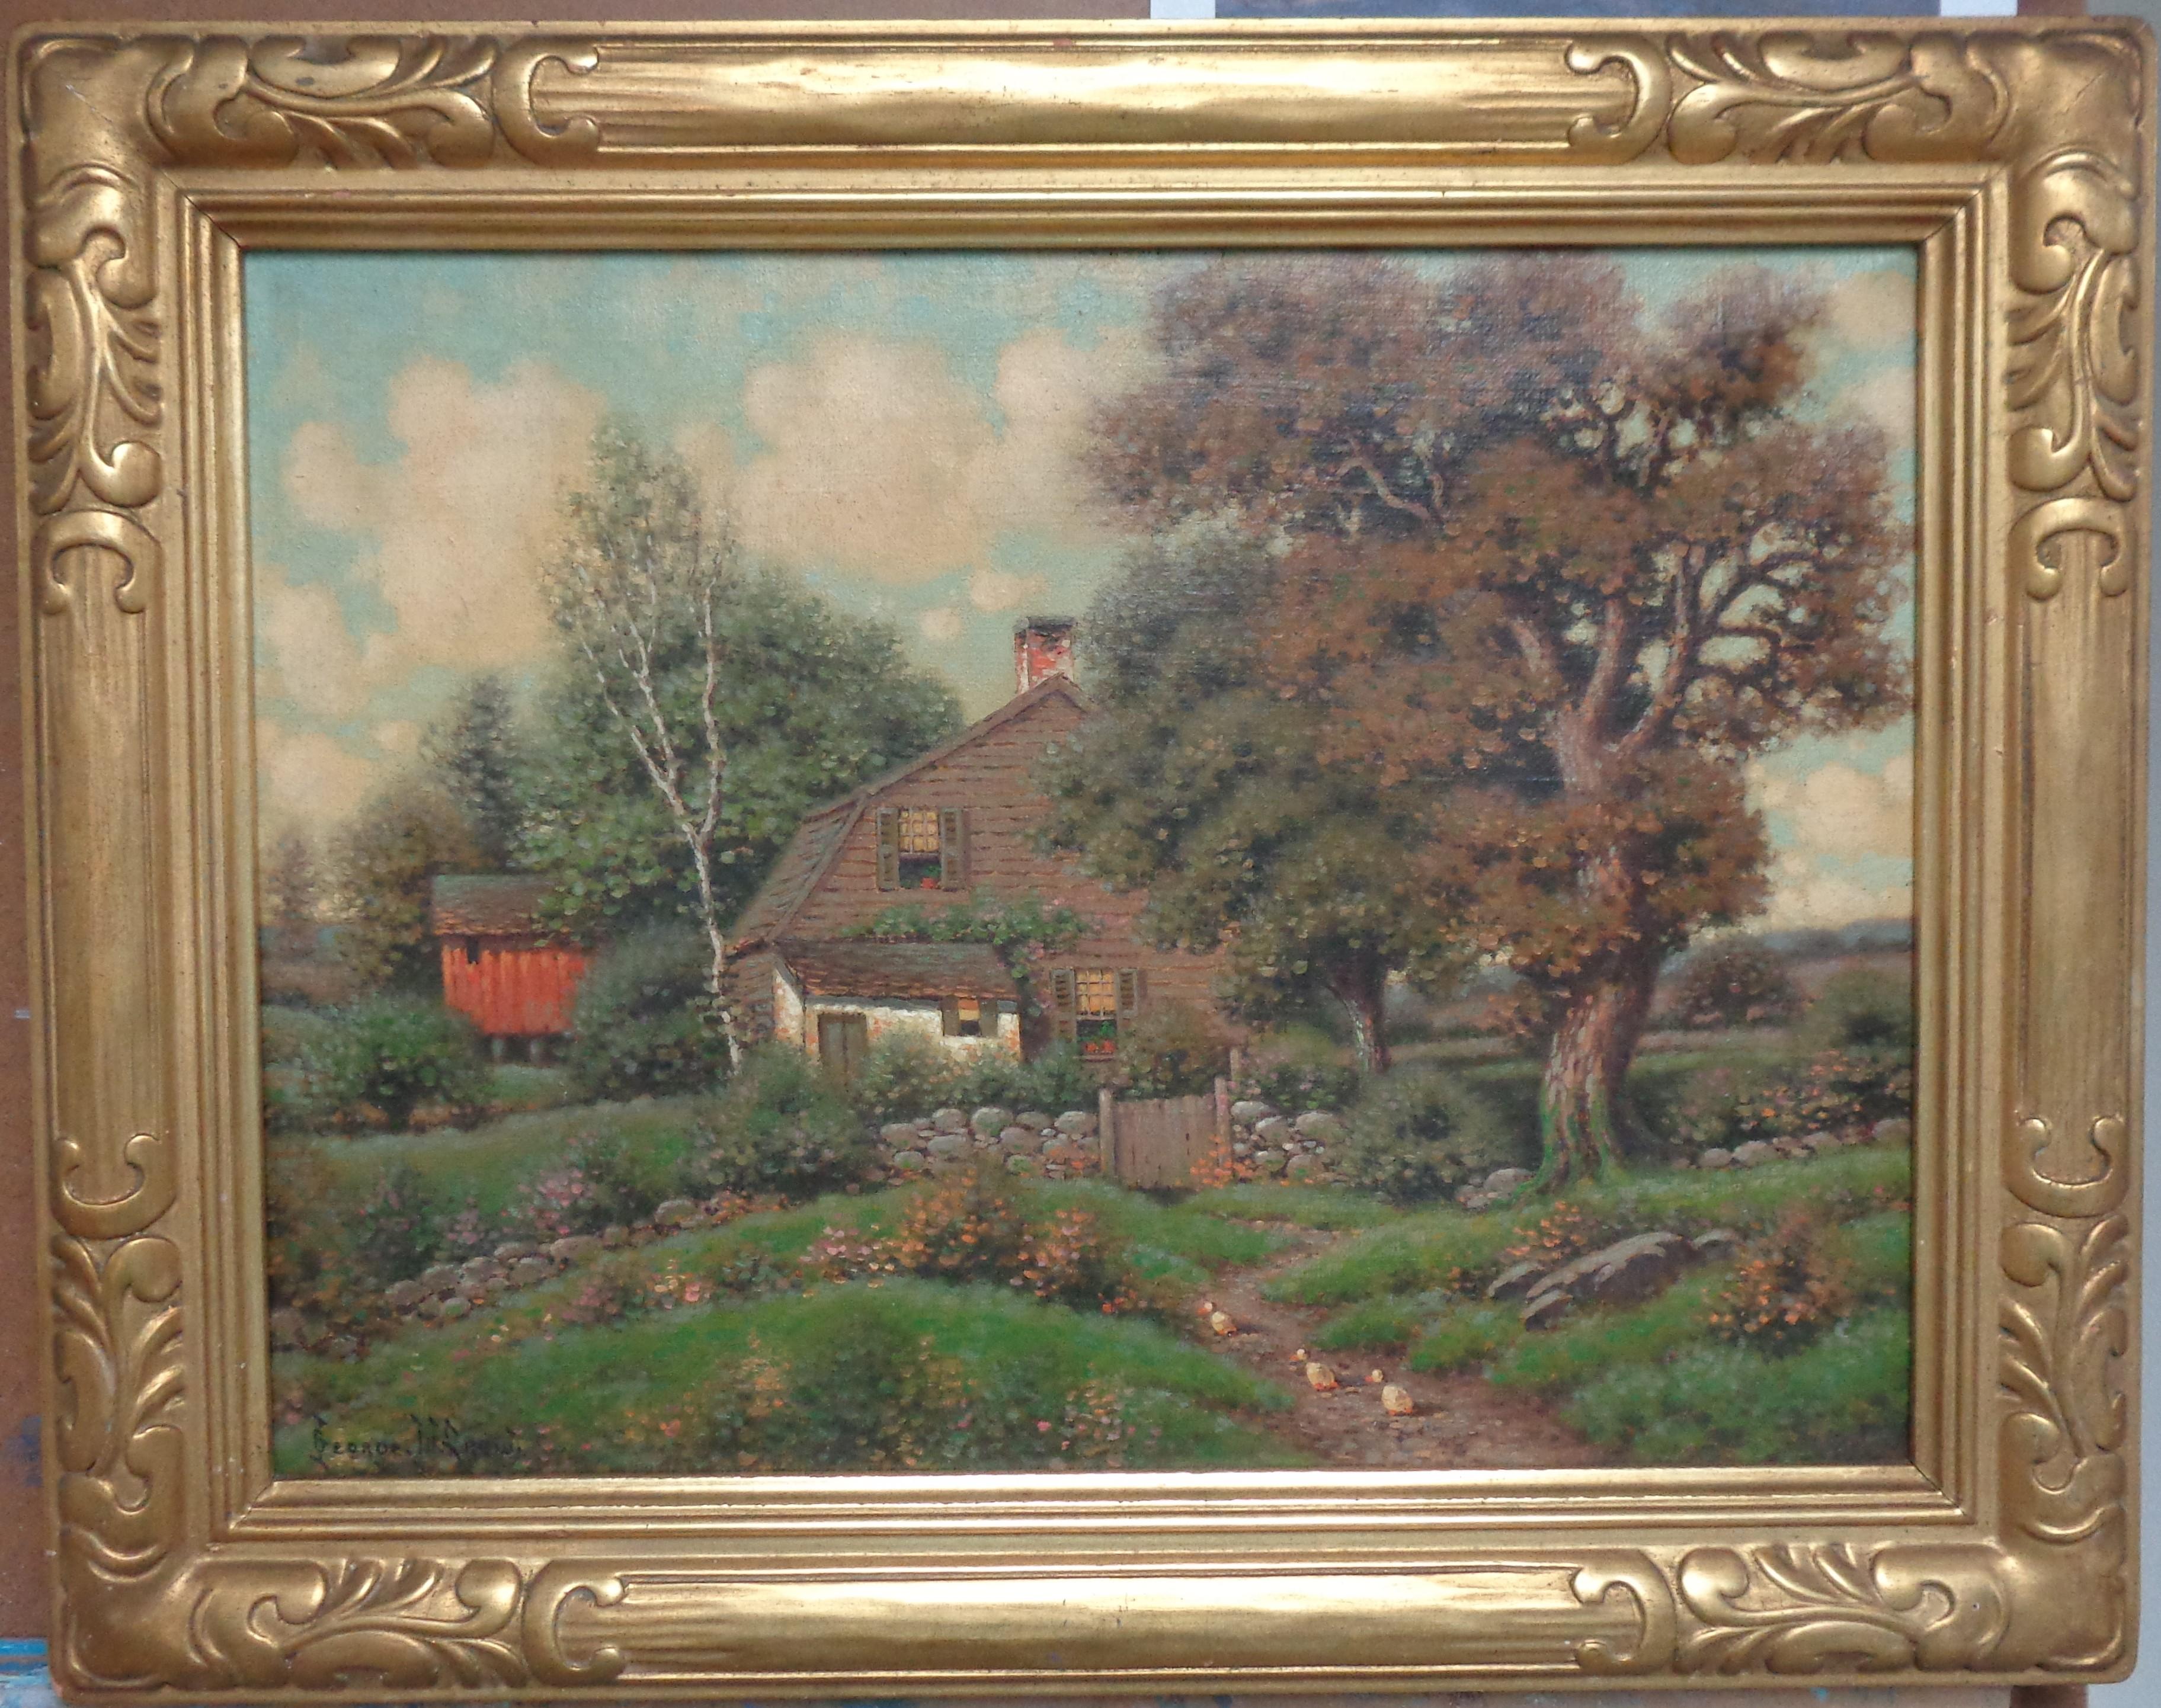 George W. Drew
American  1875 - 1968
Cottage- oil on canvas in original period frame
15.5 x 19.5 x 1.25 framed
No inpaint or restoration
George W. Drew was an American painter who was born in 1875. George W. Drew was known for his landscapes and